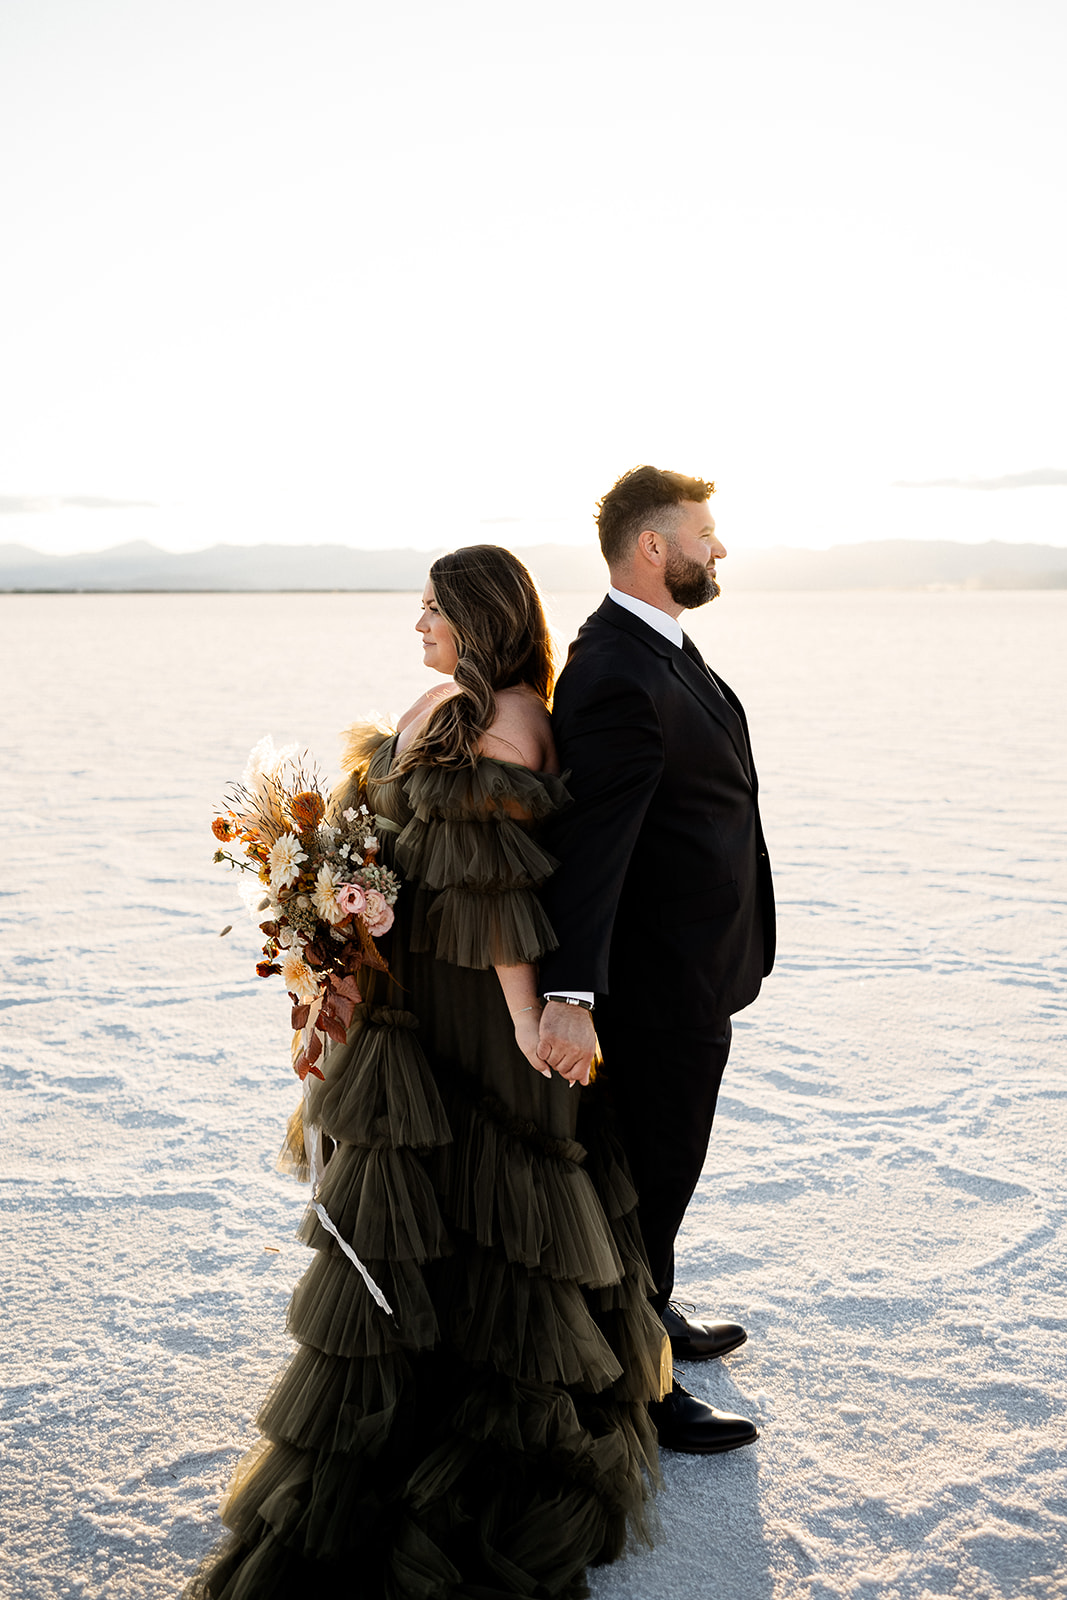 Couple at the Salt Flats, leaning back to back in formal attire with the white textured salt